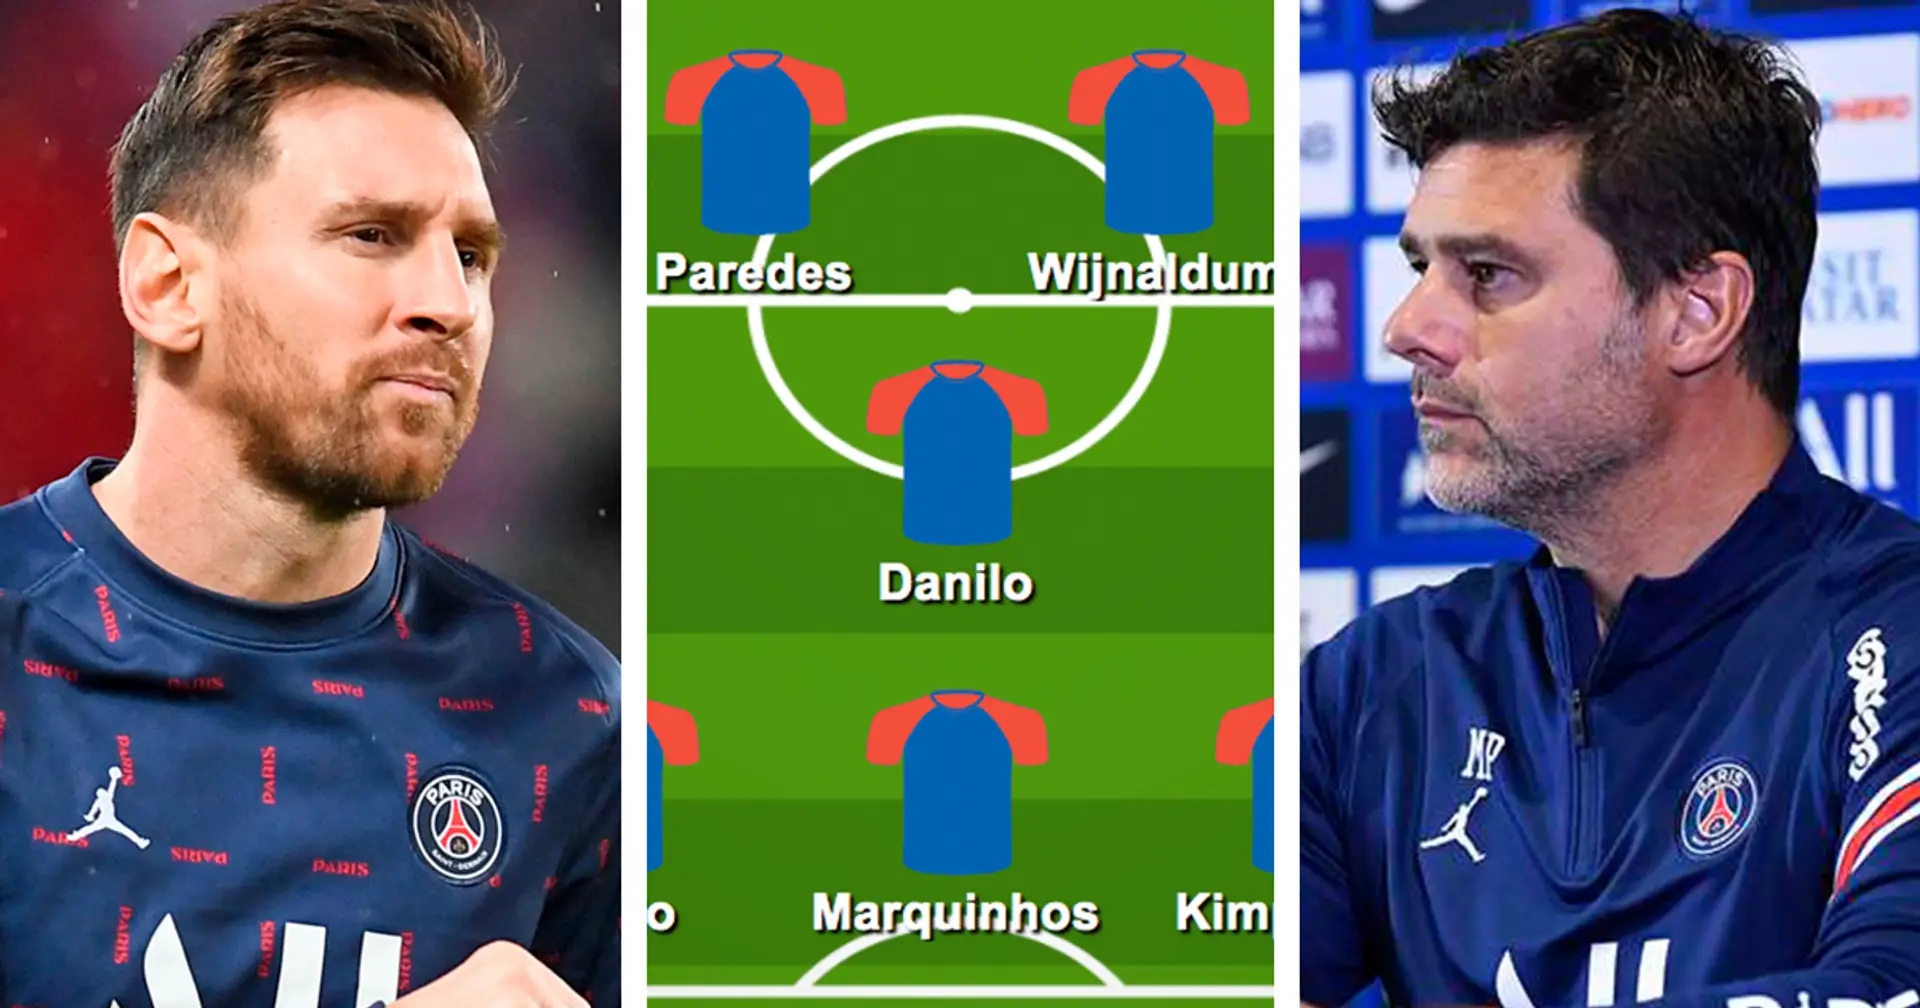 To risk or not to risk Messi? Select PSG's ultimate XI for Man City clash from 3 options